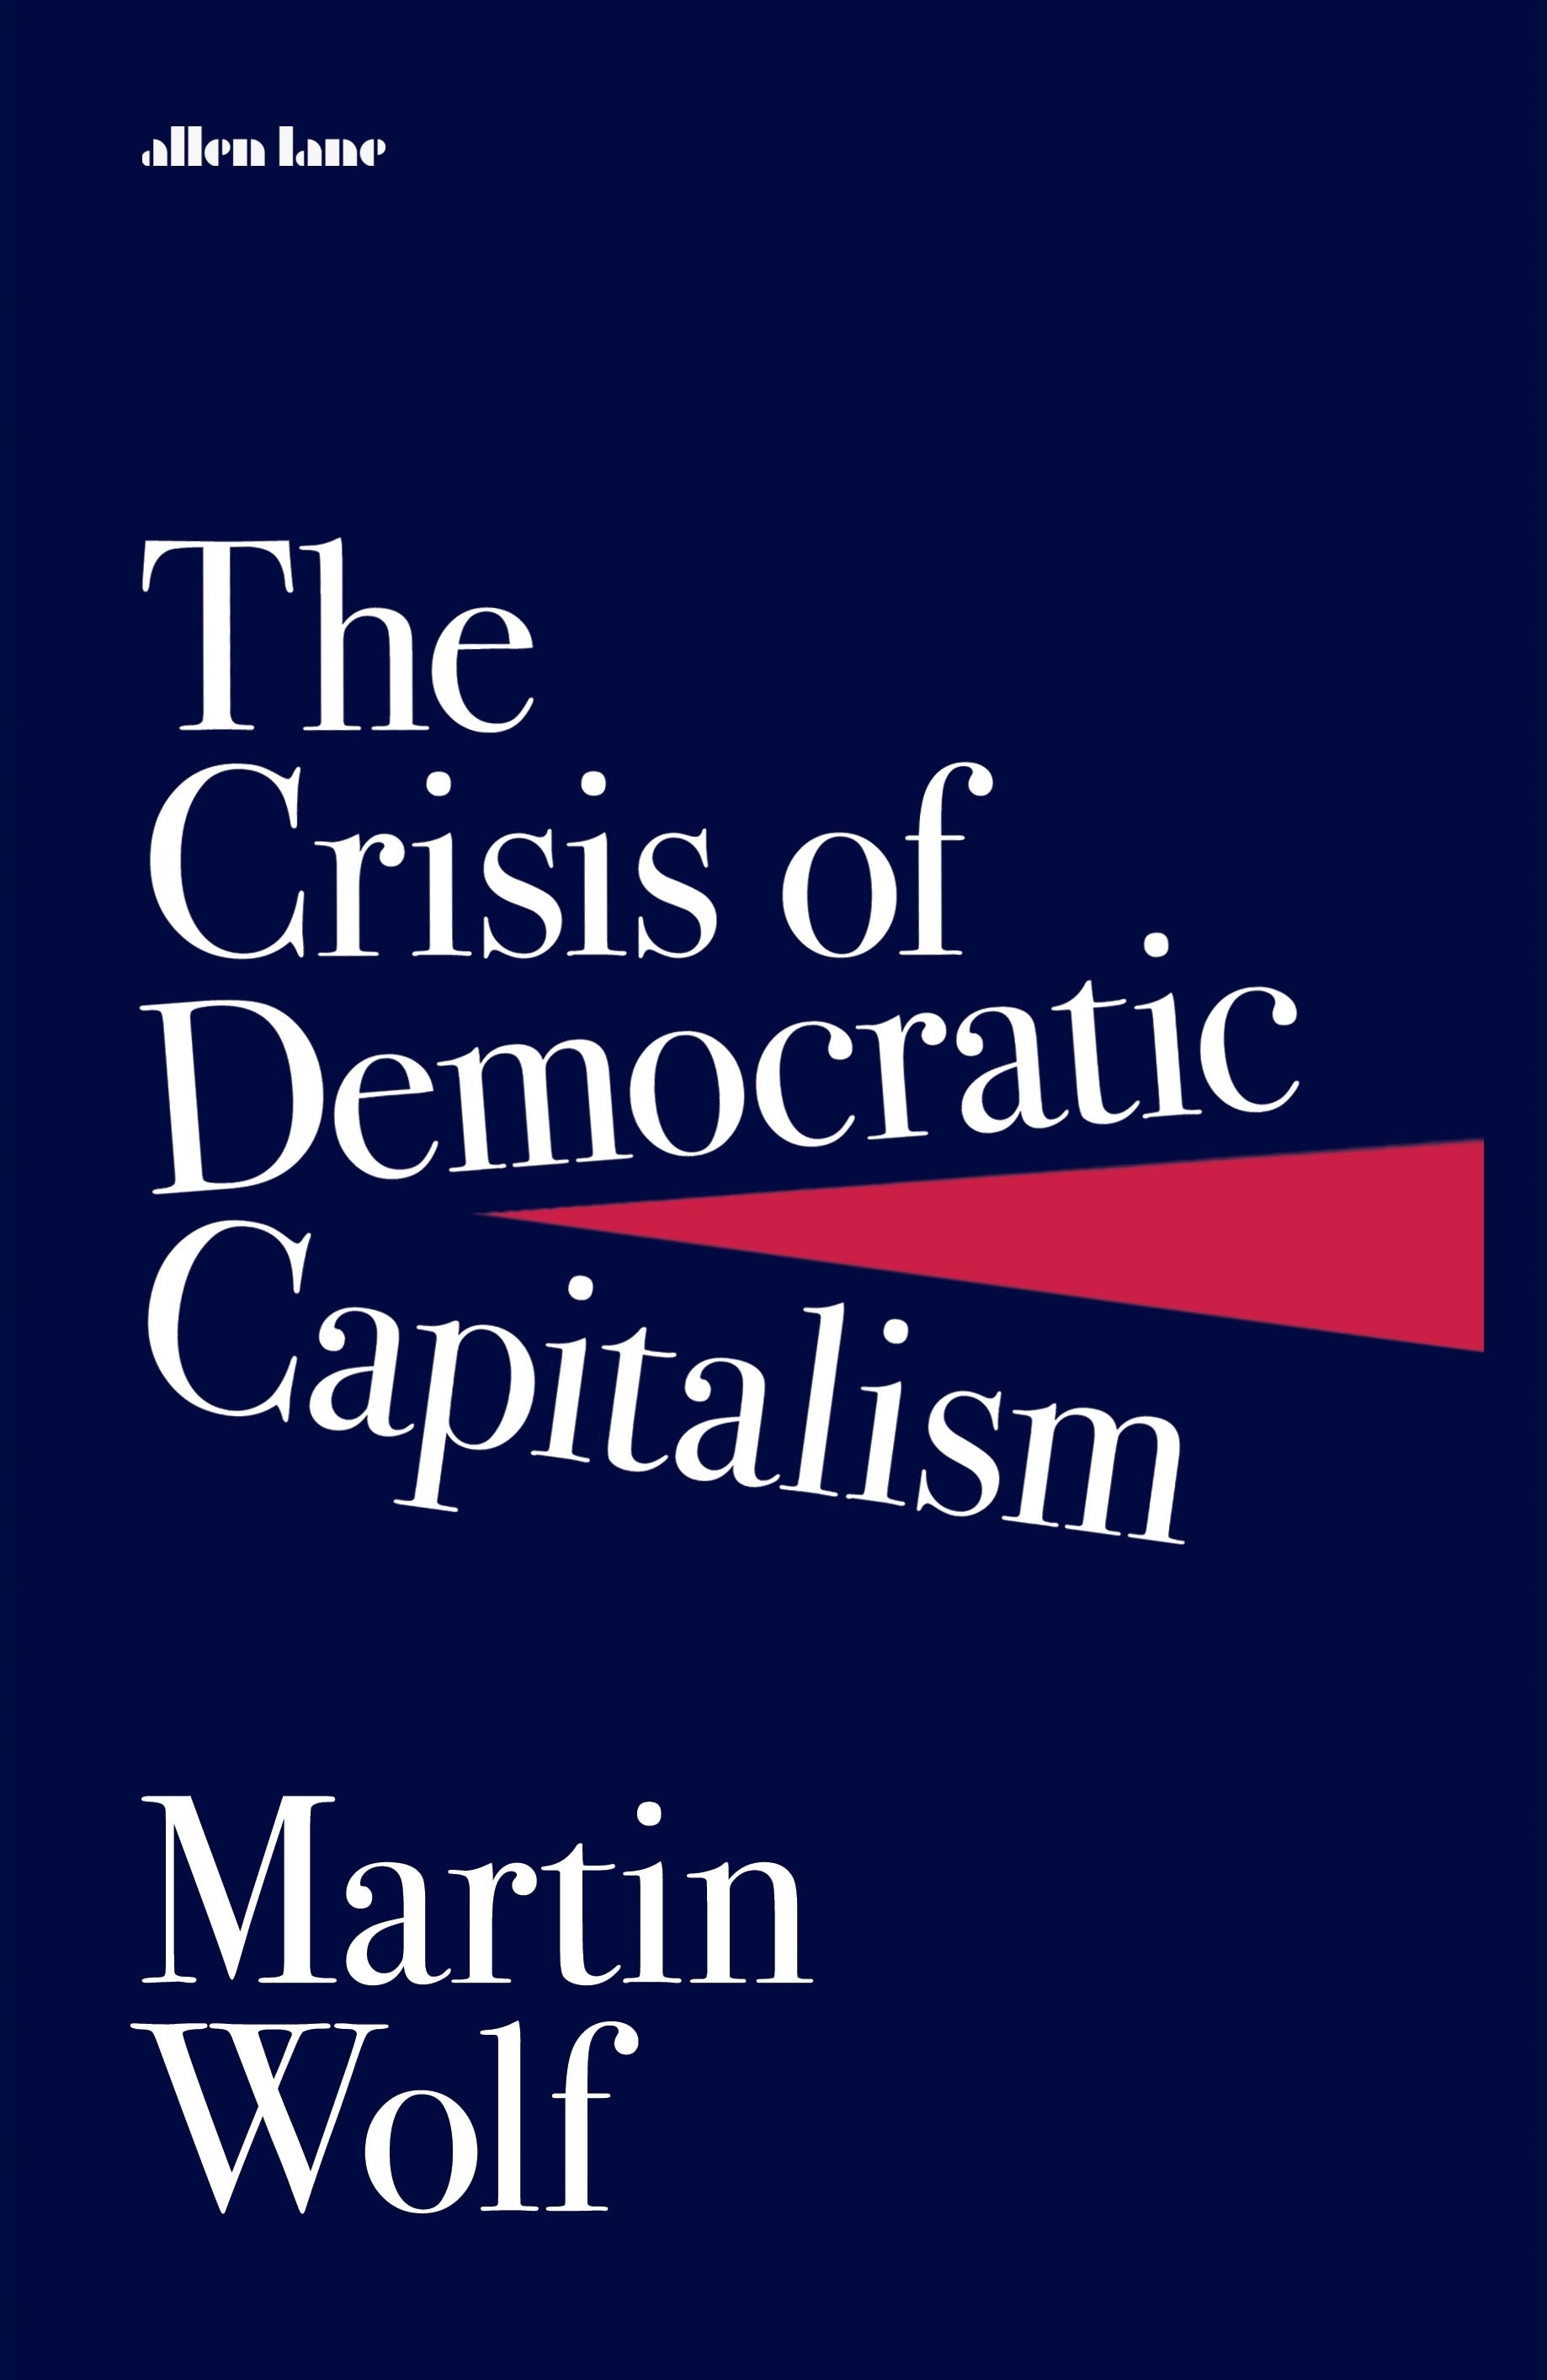 Book “The Crisis of Democratic Capitalism” by Martin Wolf — February 2, 2023